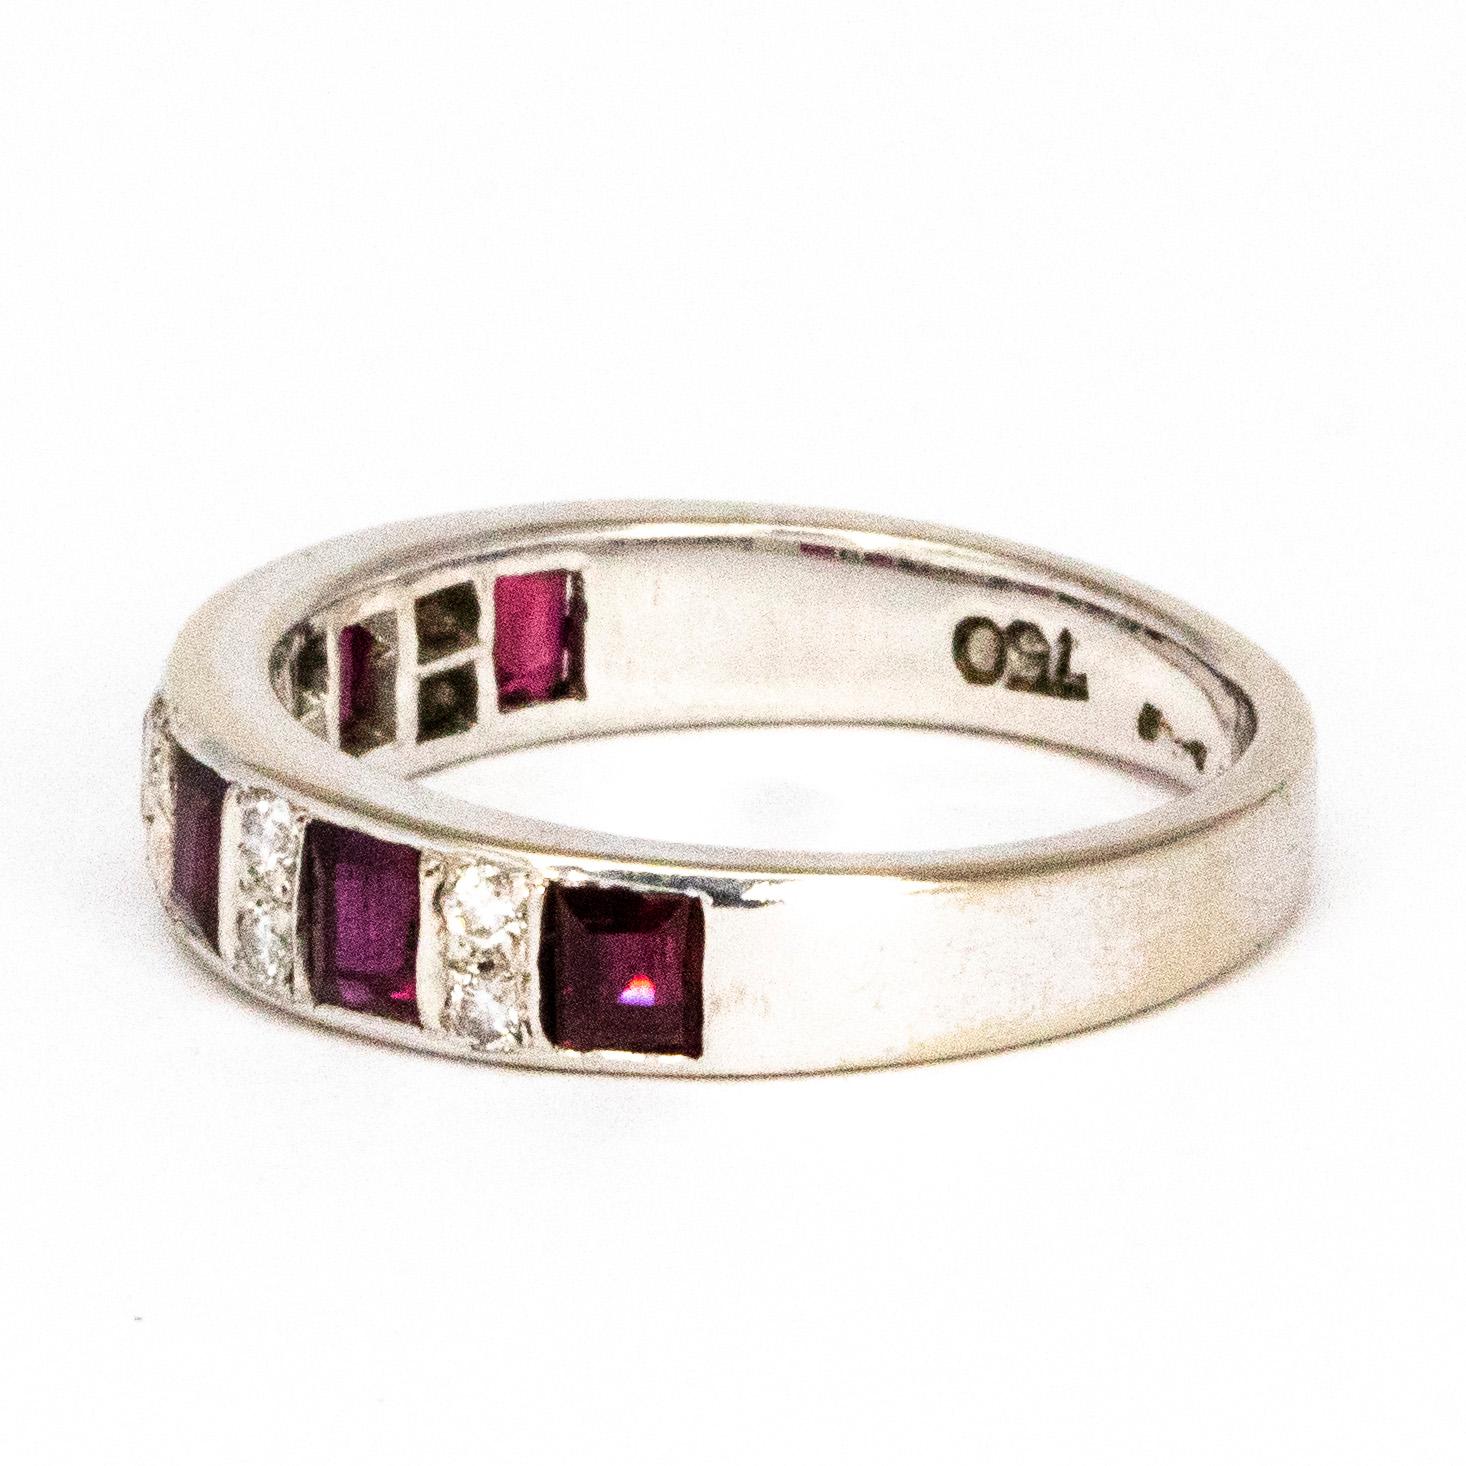 This gorgeous eternity band holds a 25 pt square cut ruby in-between every pair of vertical 3pt diamonds. The rubies ave a gorgeous rich red colour ad the diamonds are bright and sparkling. 

Ring Size: M 6 1/4
Band Width: 4.5mm 